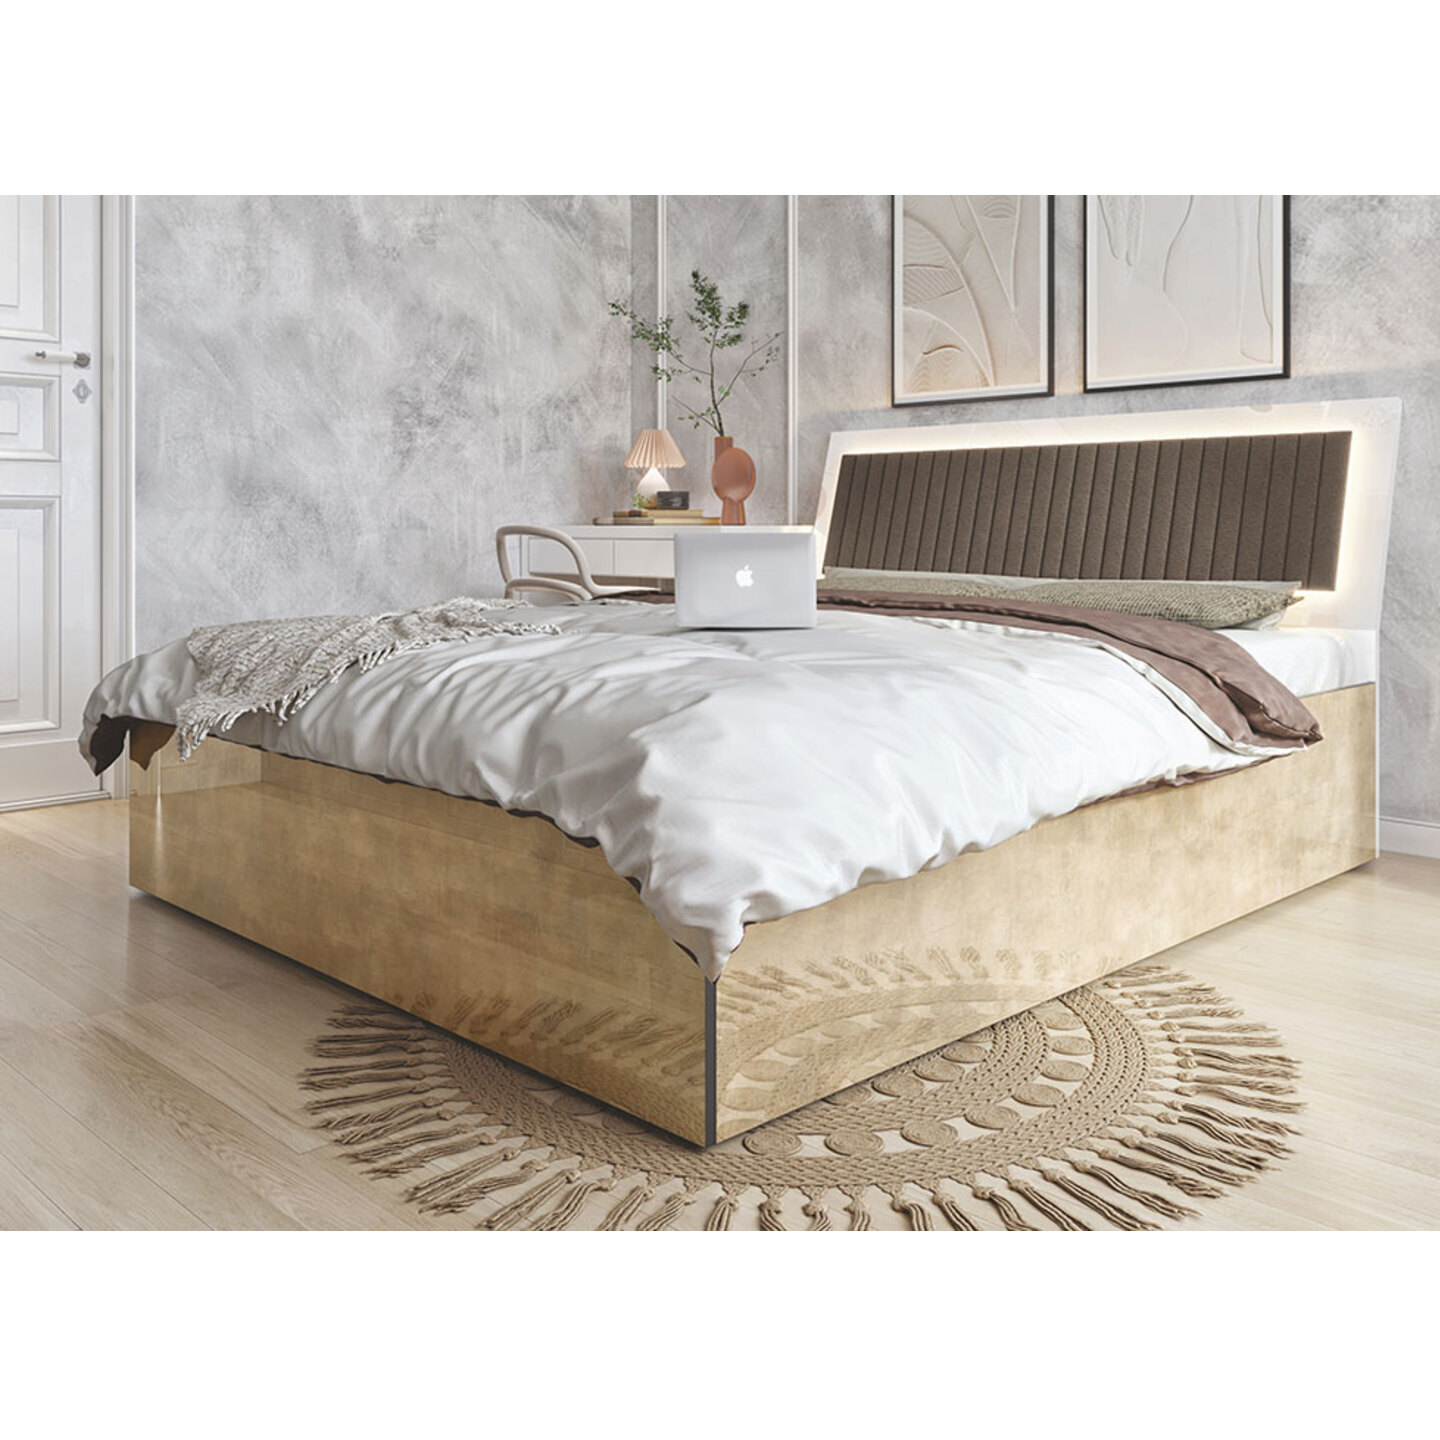 RLF King Size Bed 78"x72" Neon In Brown Colour